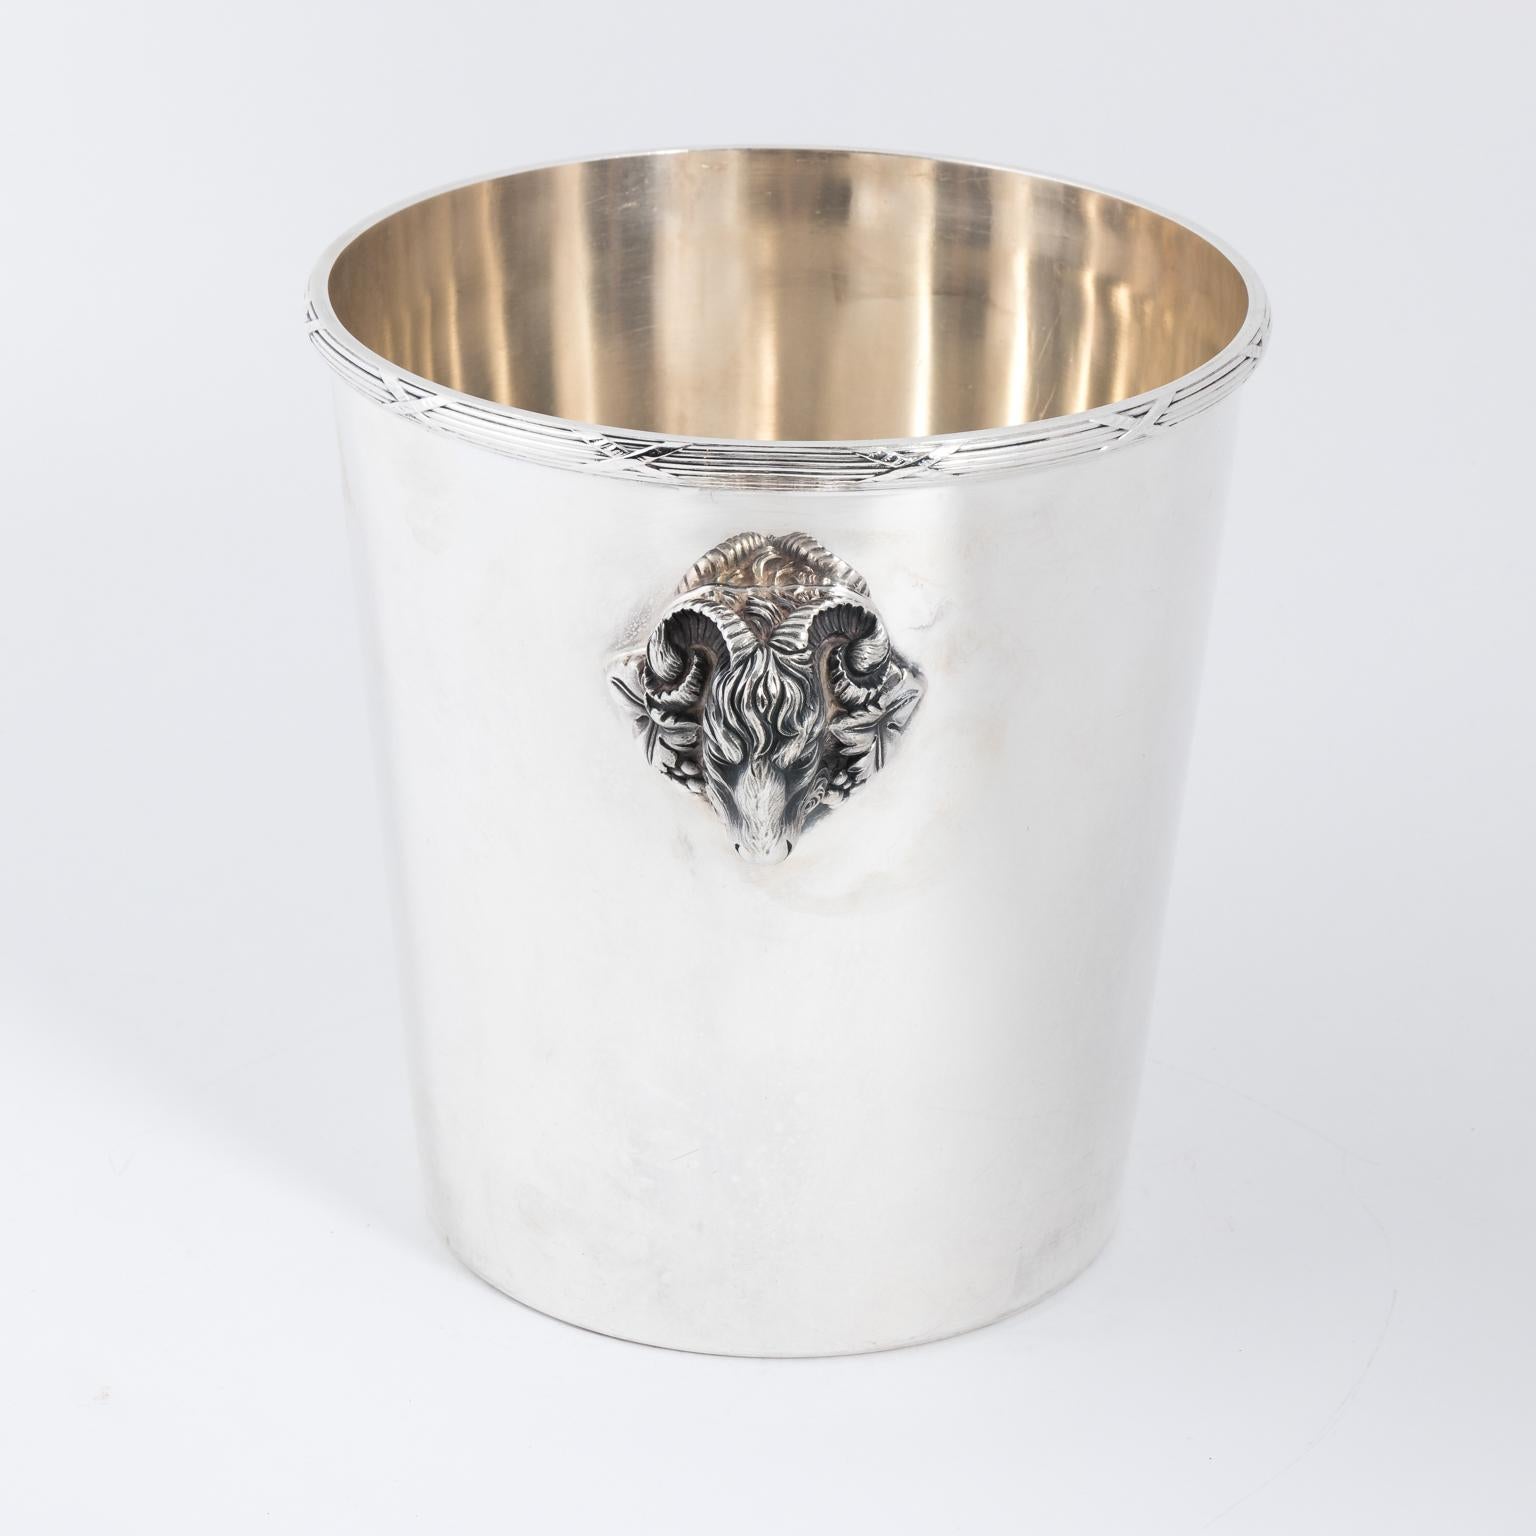 Christofle neoclassical silver plate ice bucket with ram's heads handles, circa 1950s.
 